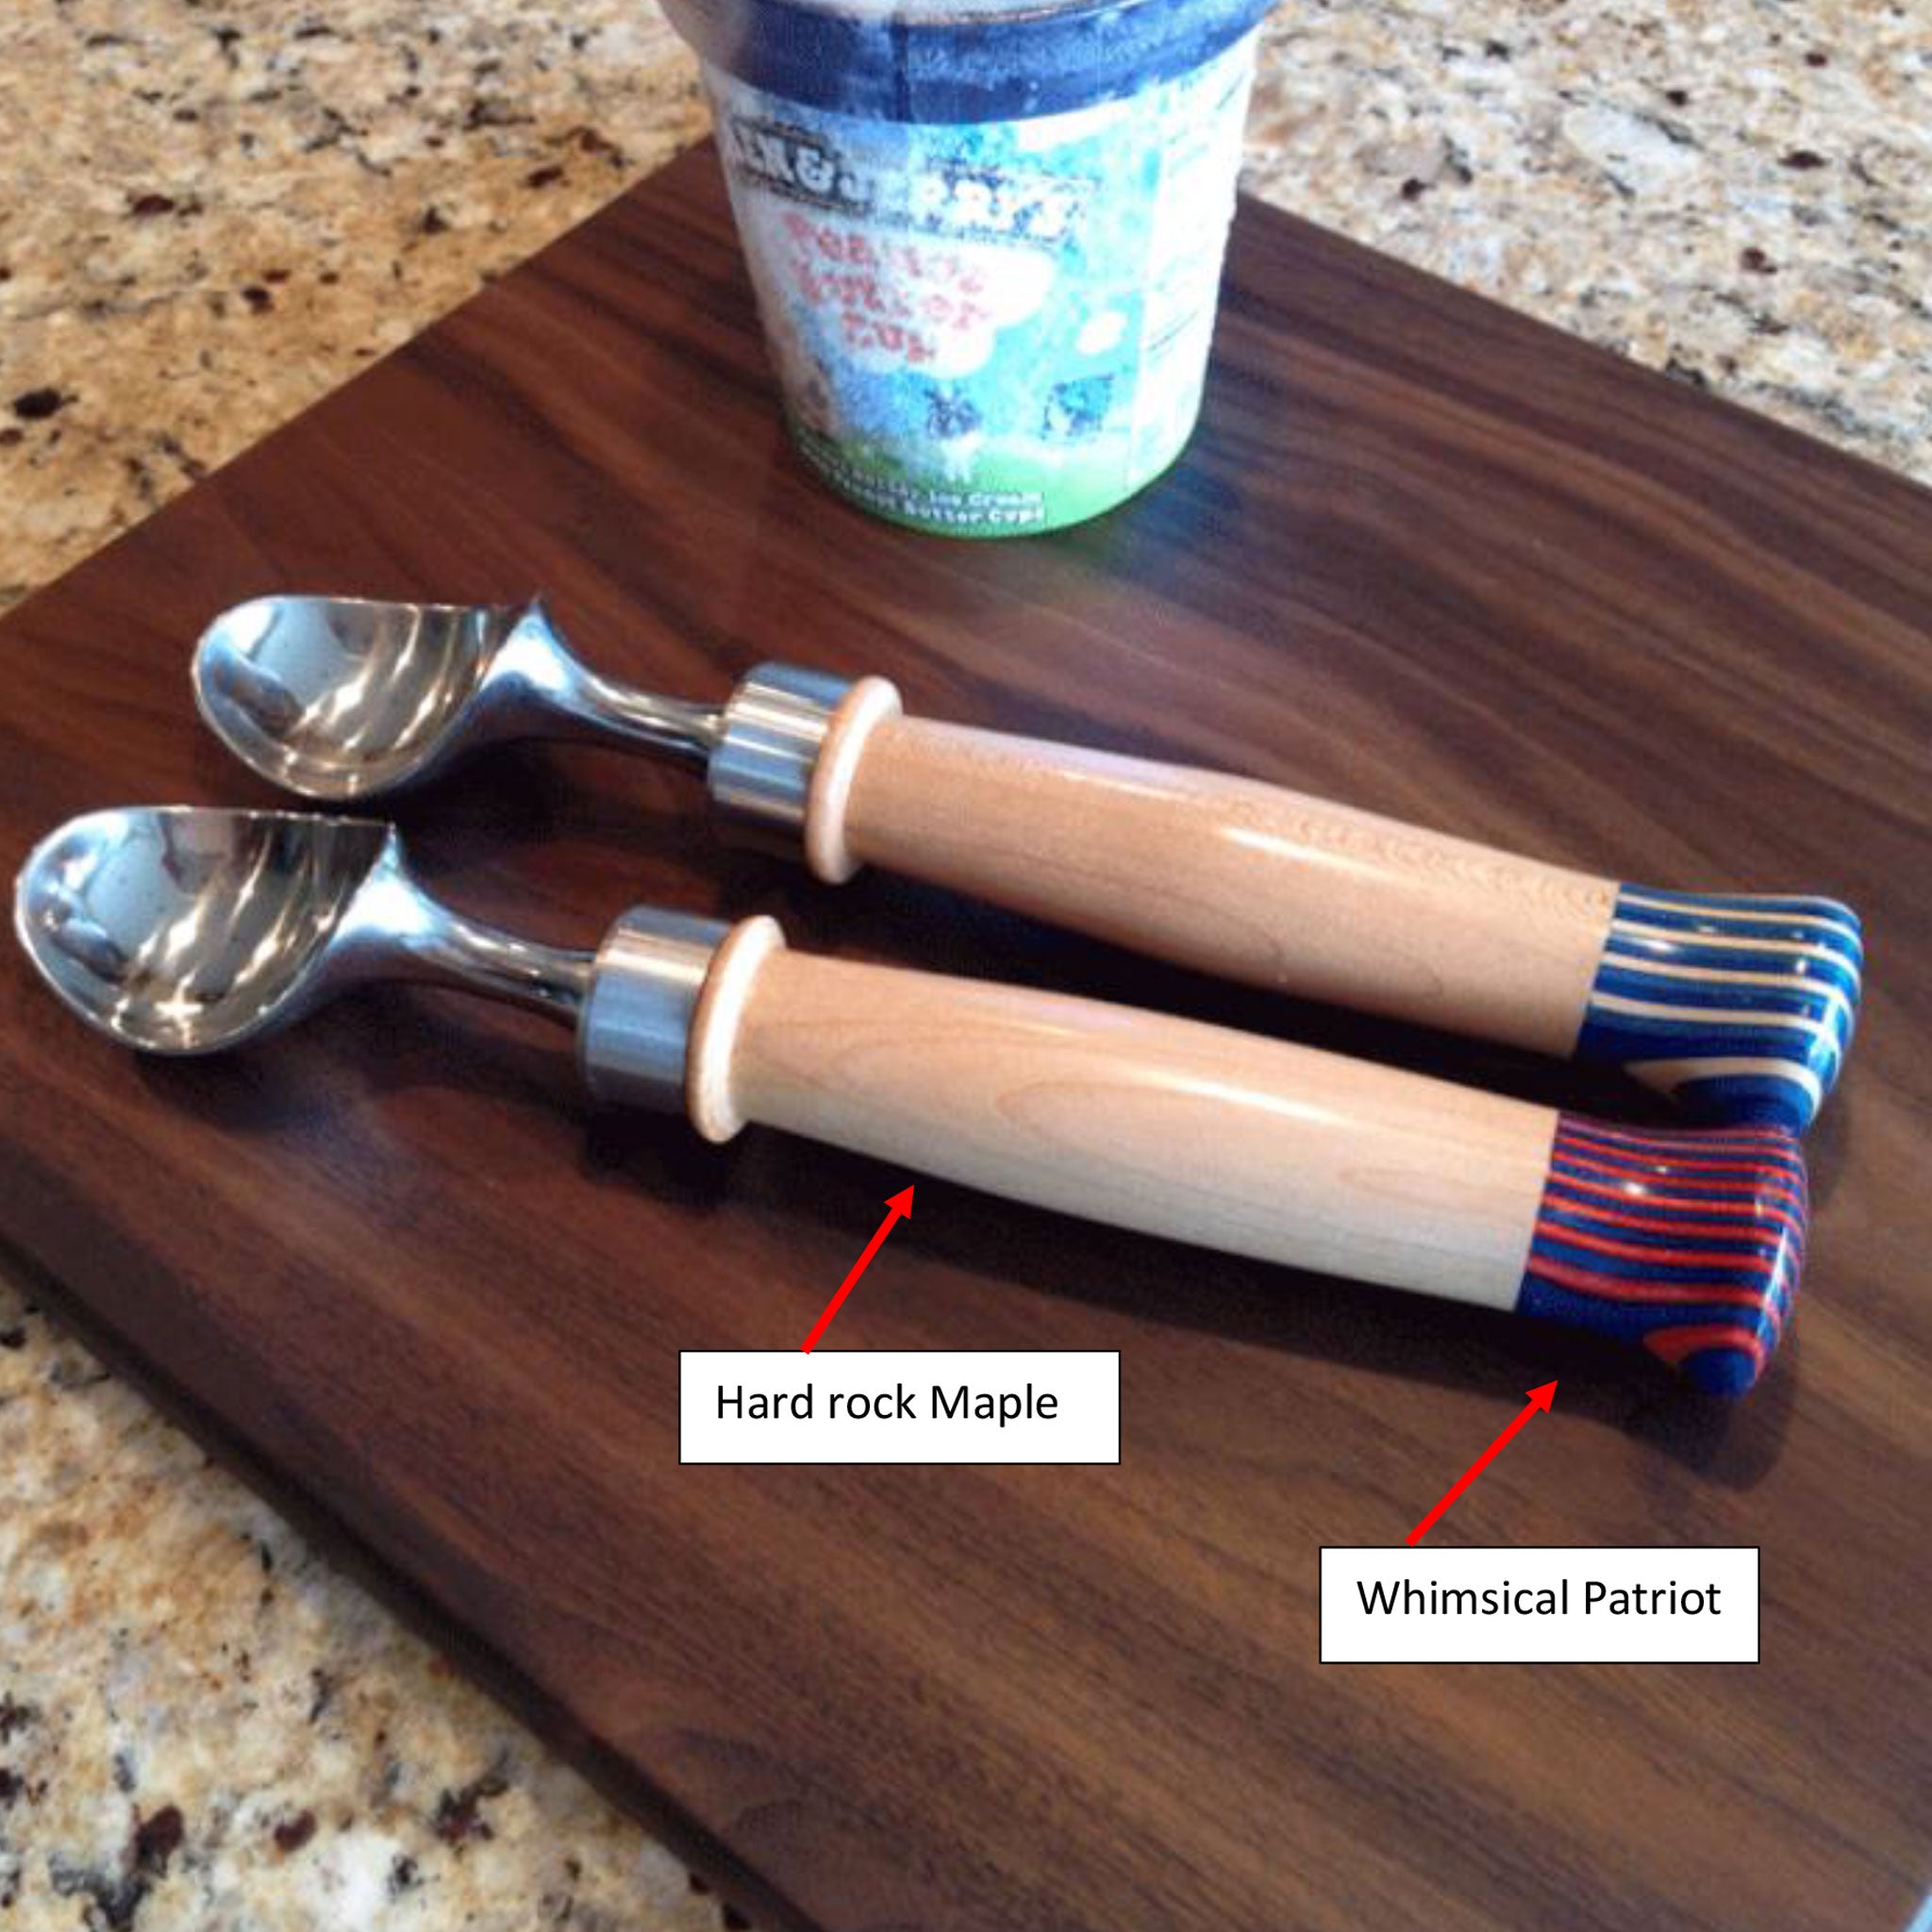 Ice Cream Scoops with Color Resin Handles - Michael's Woodcrafts